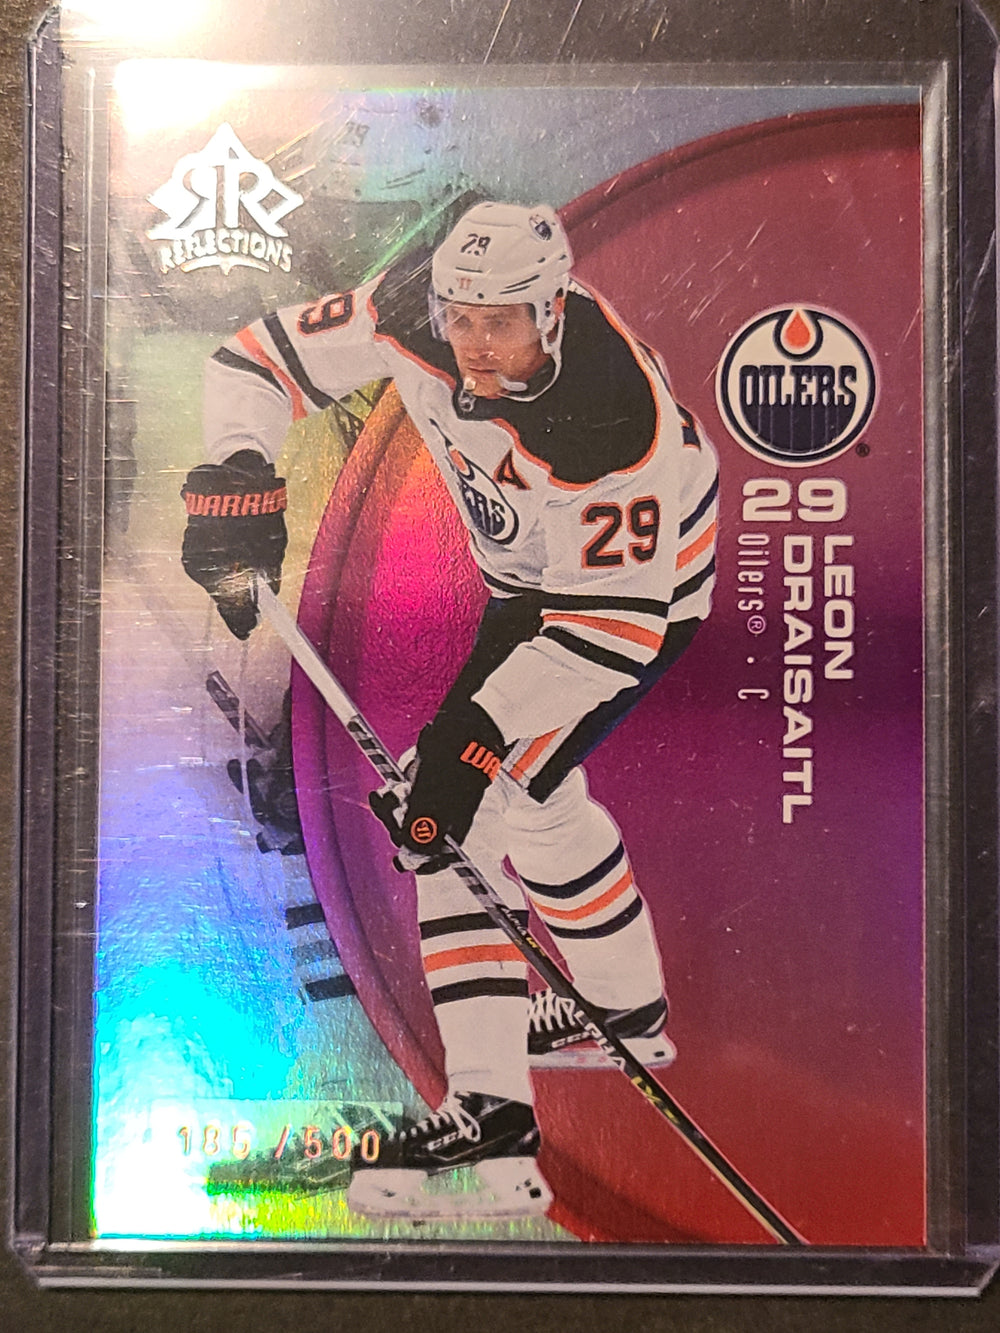 2021-22 Upper Deck Extended Reflections Ruby Parallel #16 Leon Draisaitl Edmonton Oilers 185/500